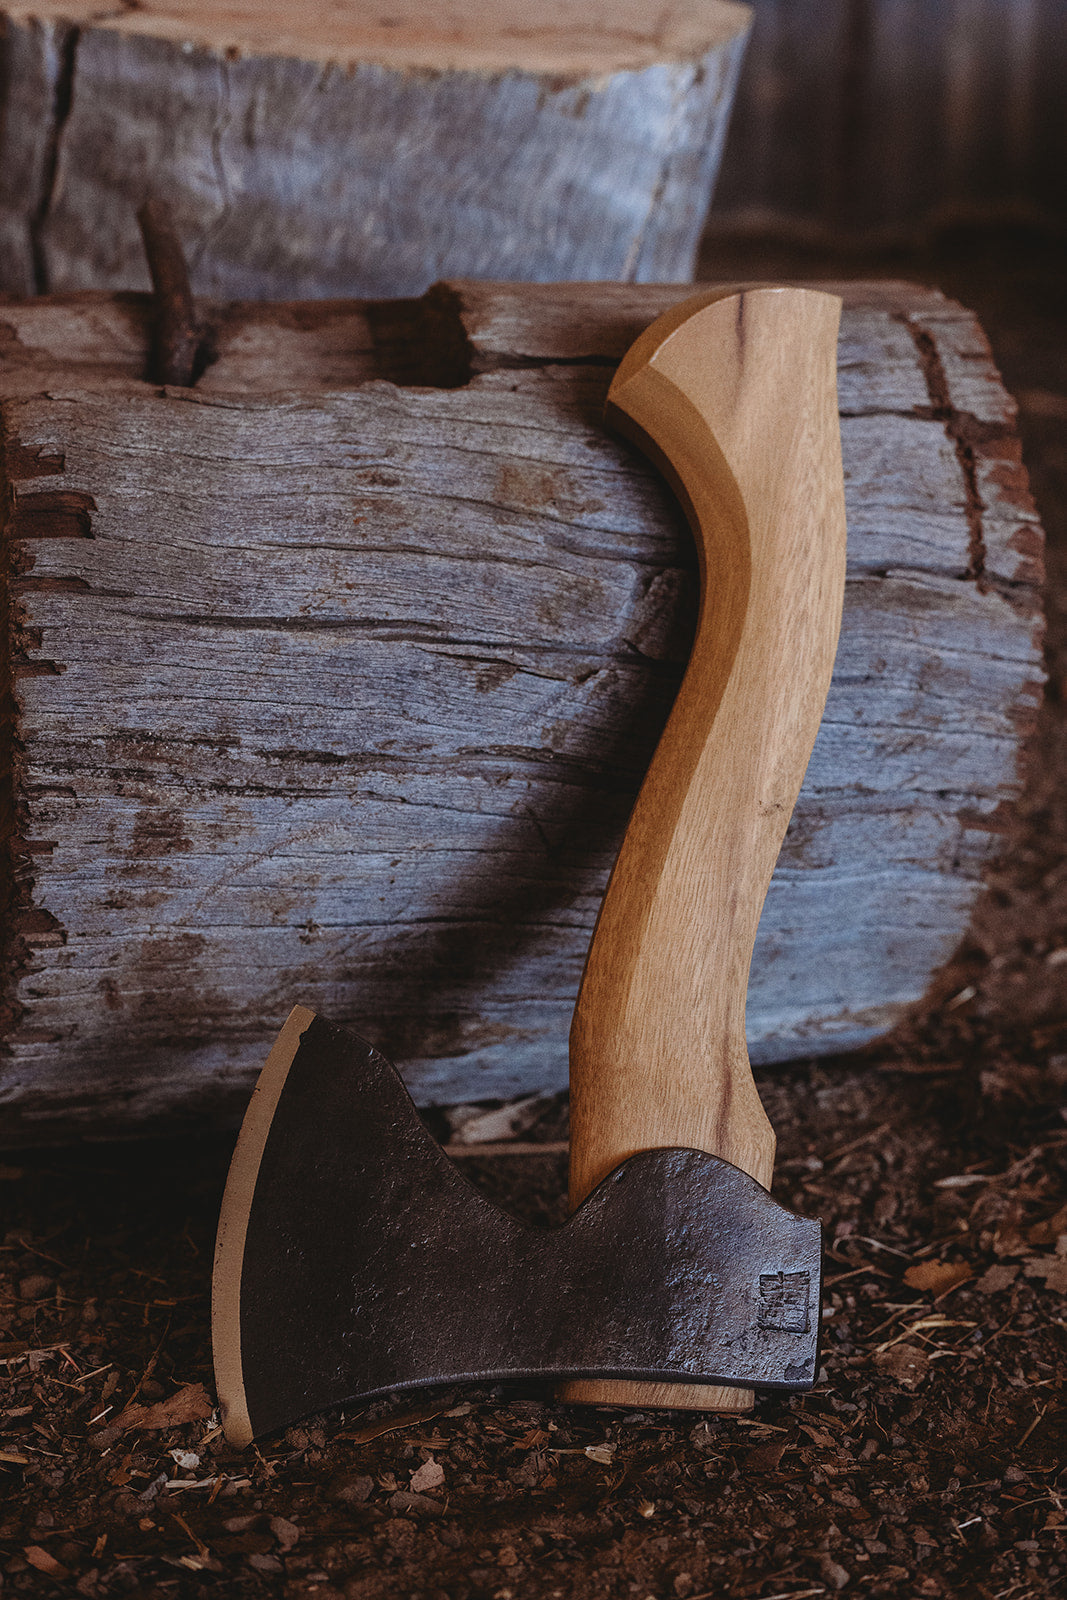 The Robin Wood Carving Axe